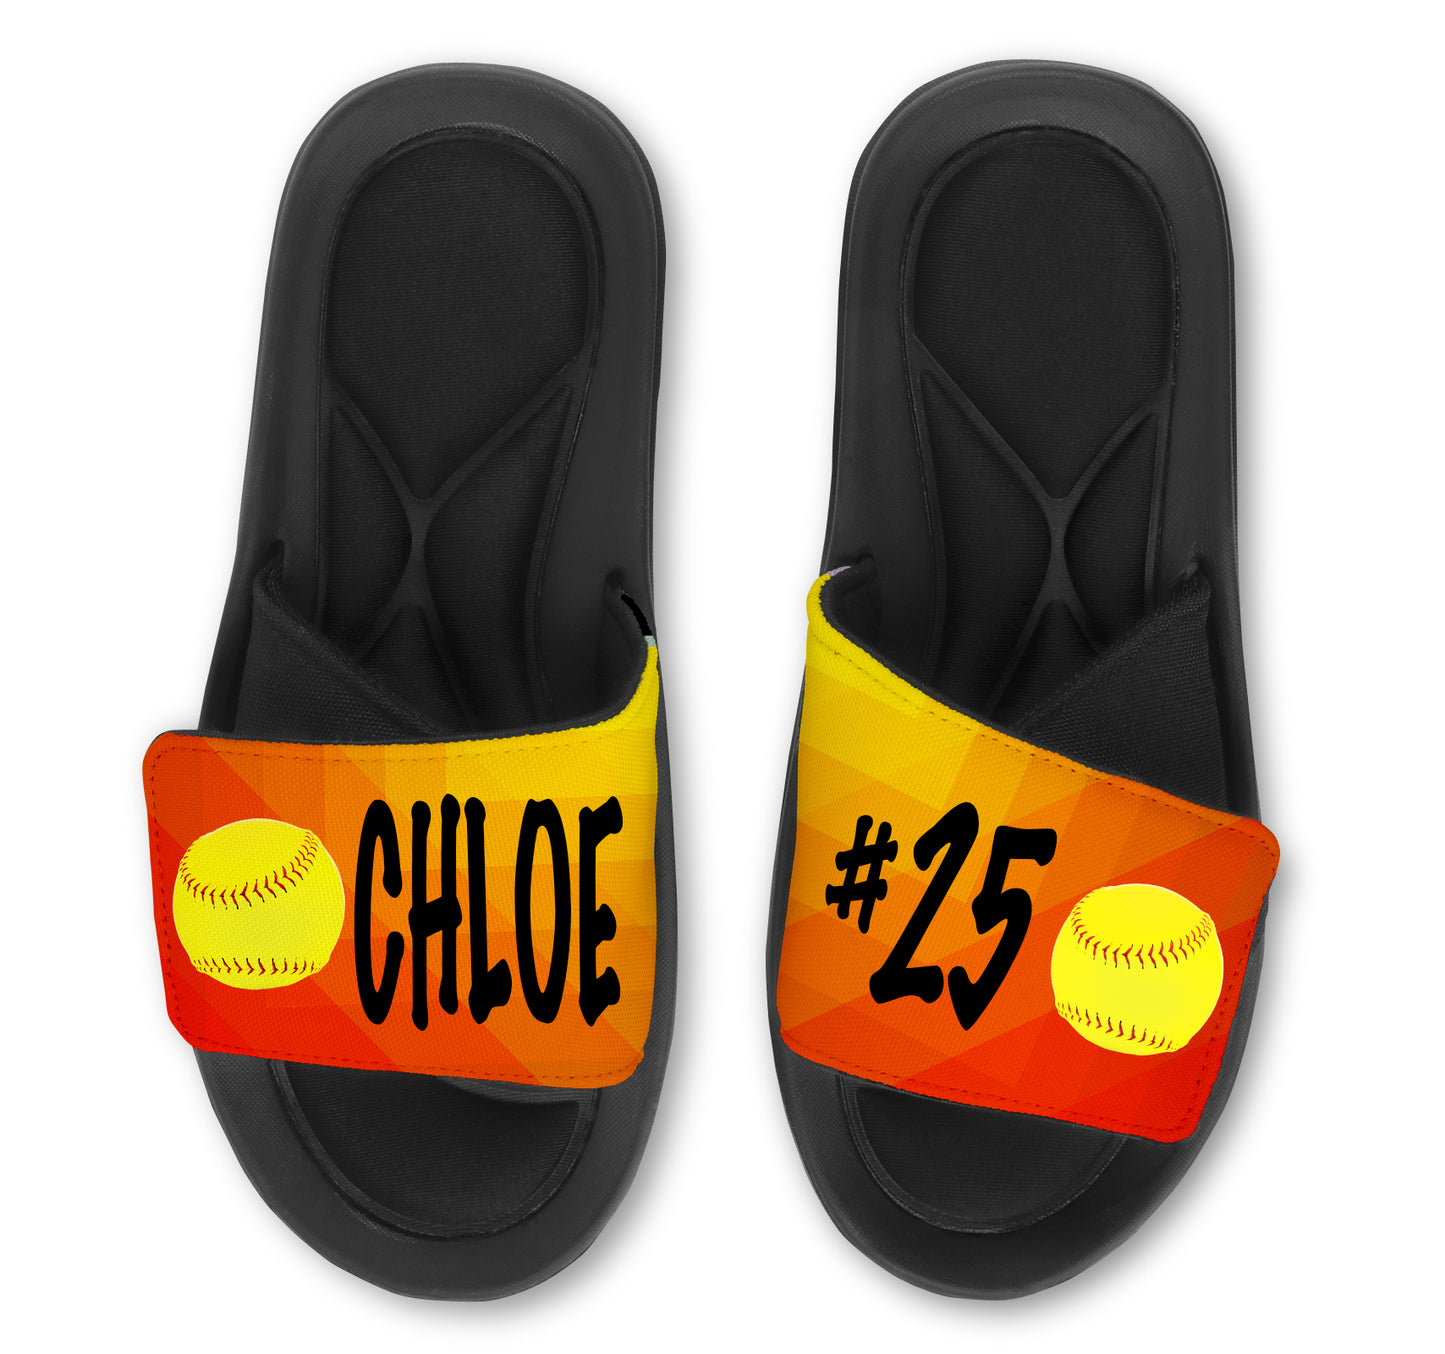 Softball Abstract Custom Slides / Sandals - Choose your Background!